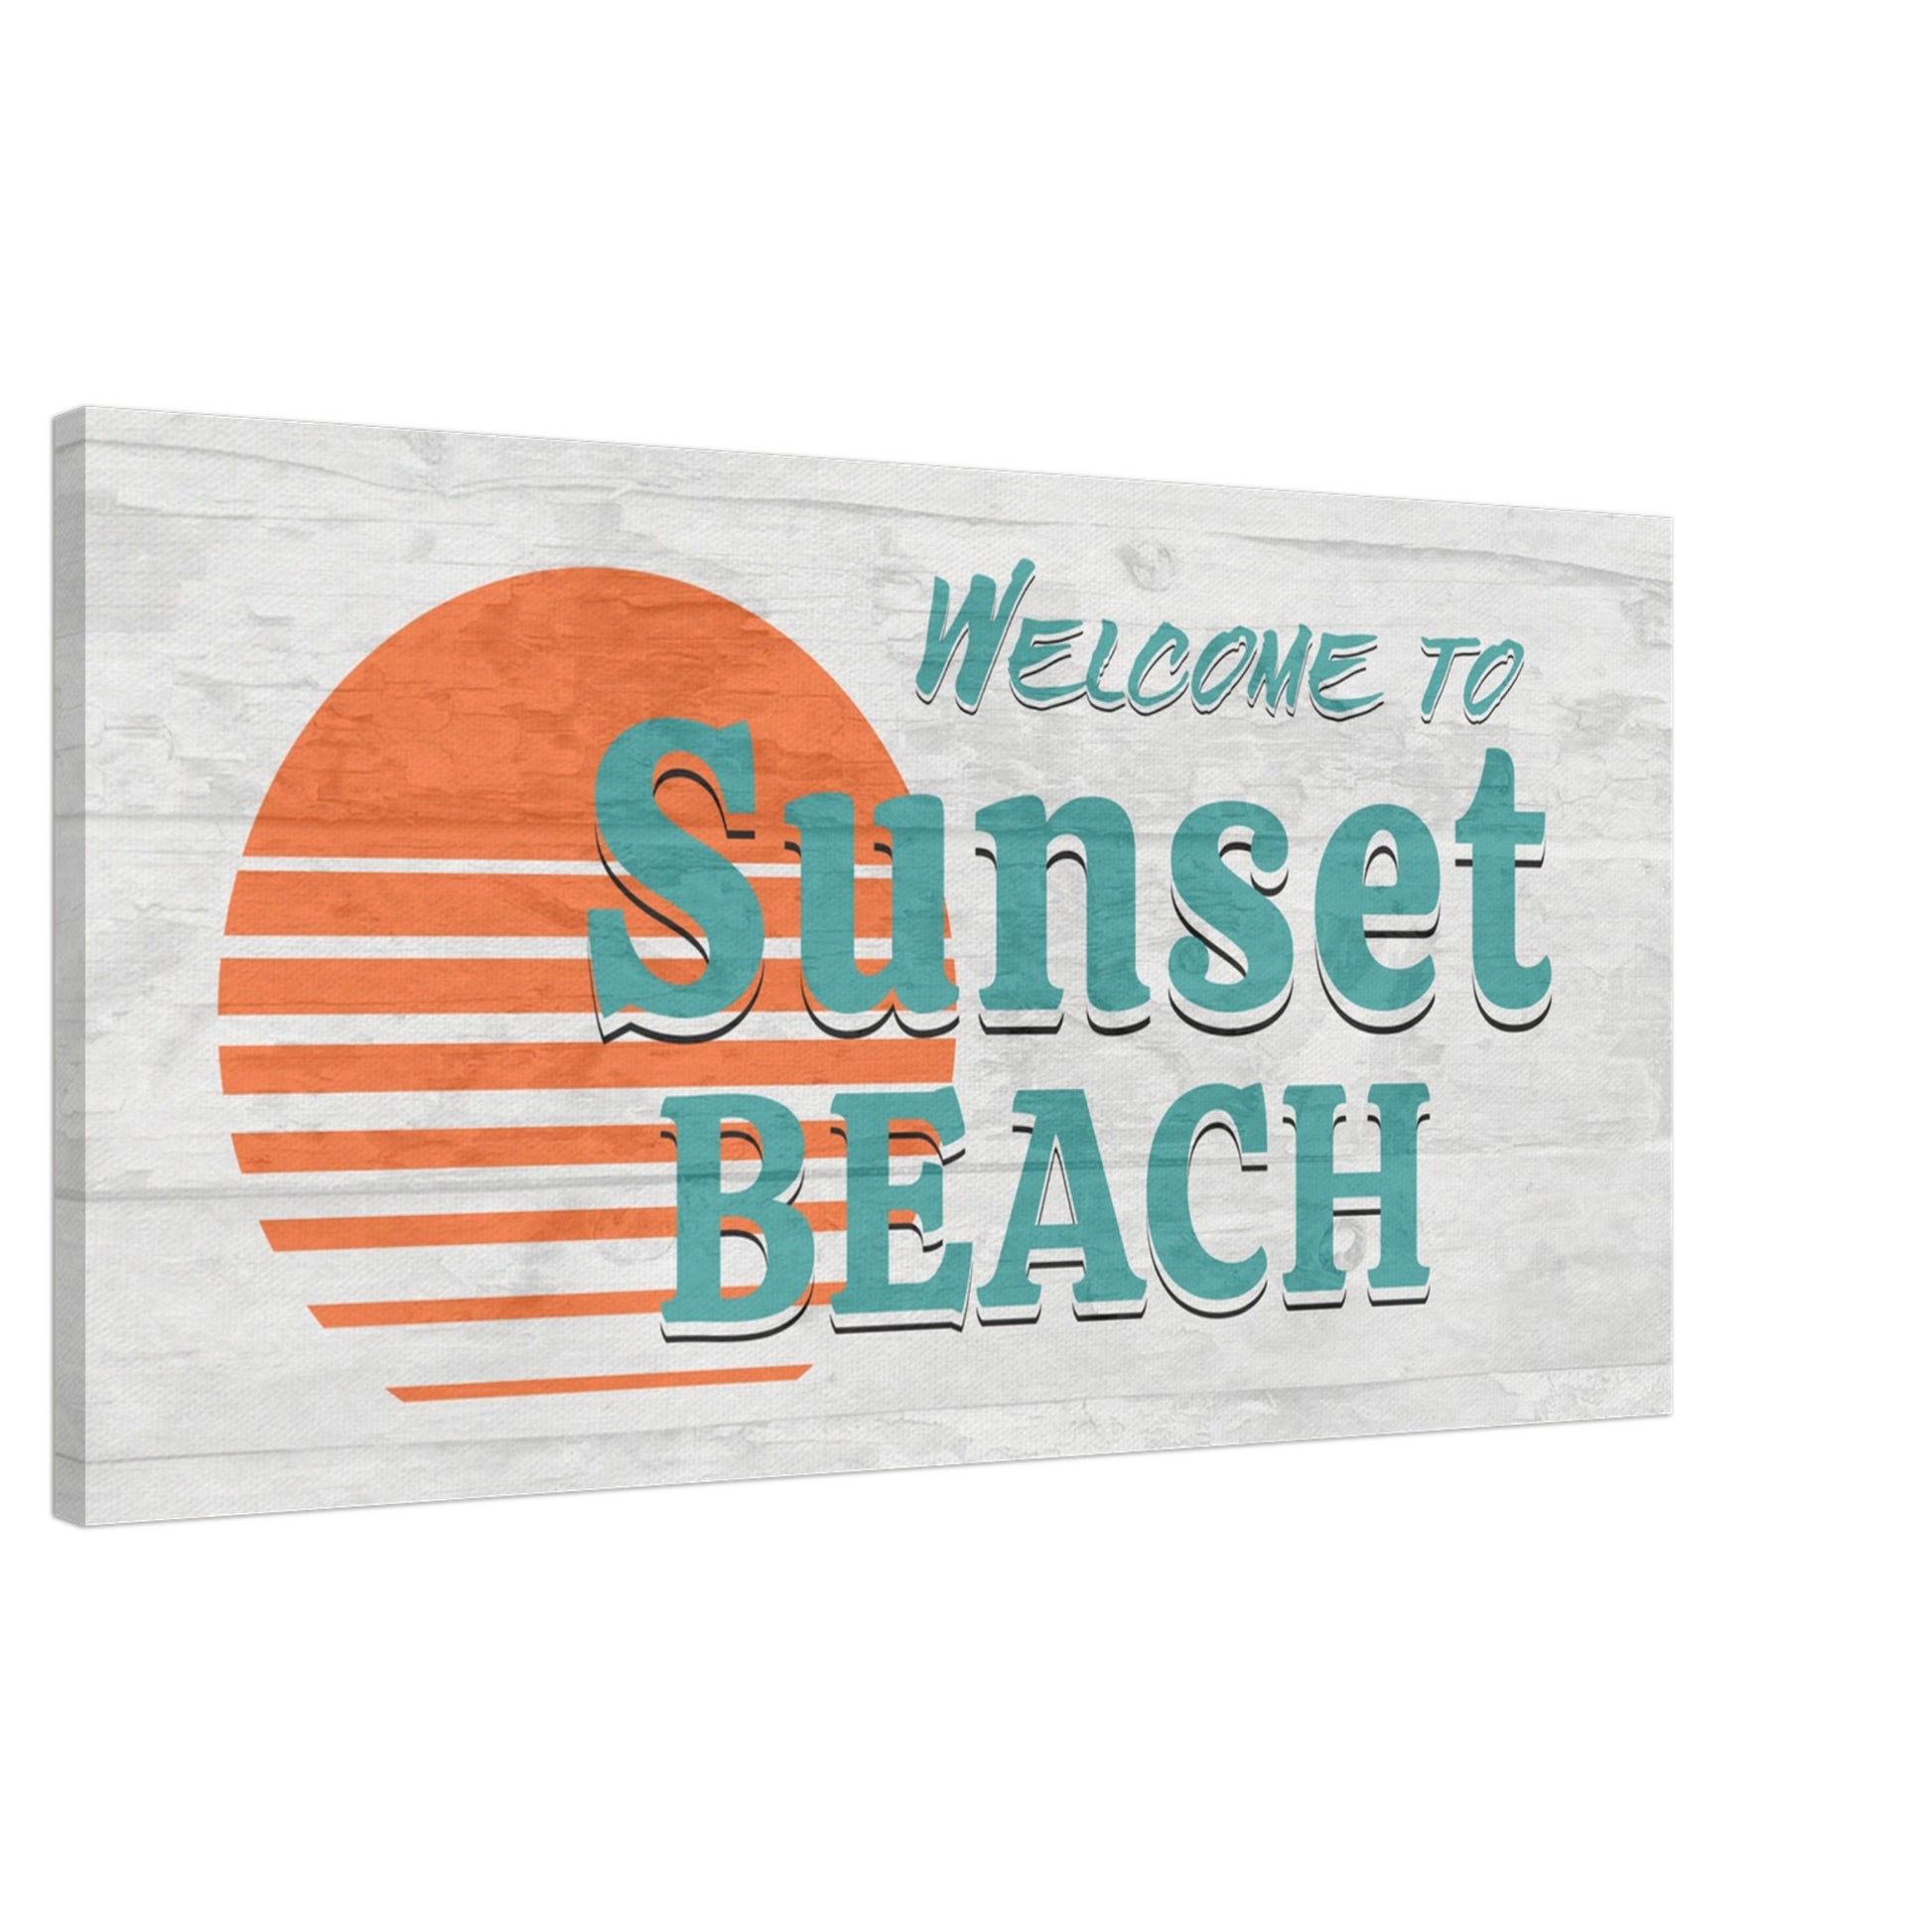 Welcome to Sunset Beach Canvas Wall Print Caribbean Rays